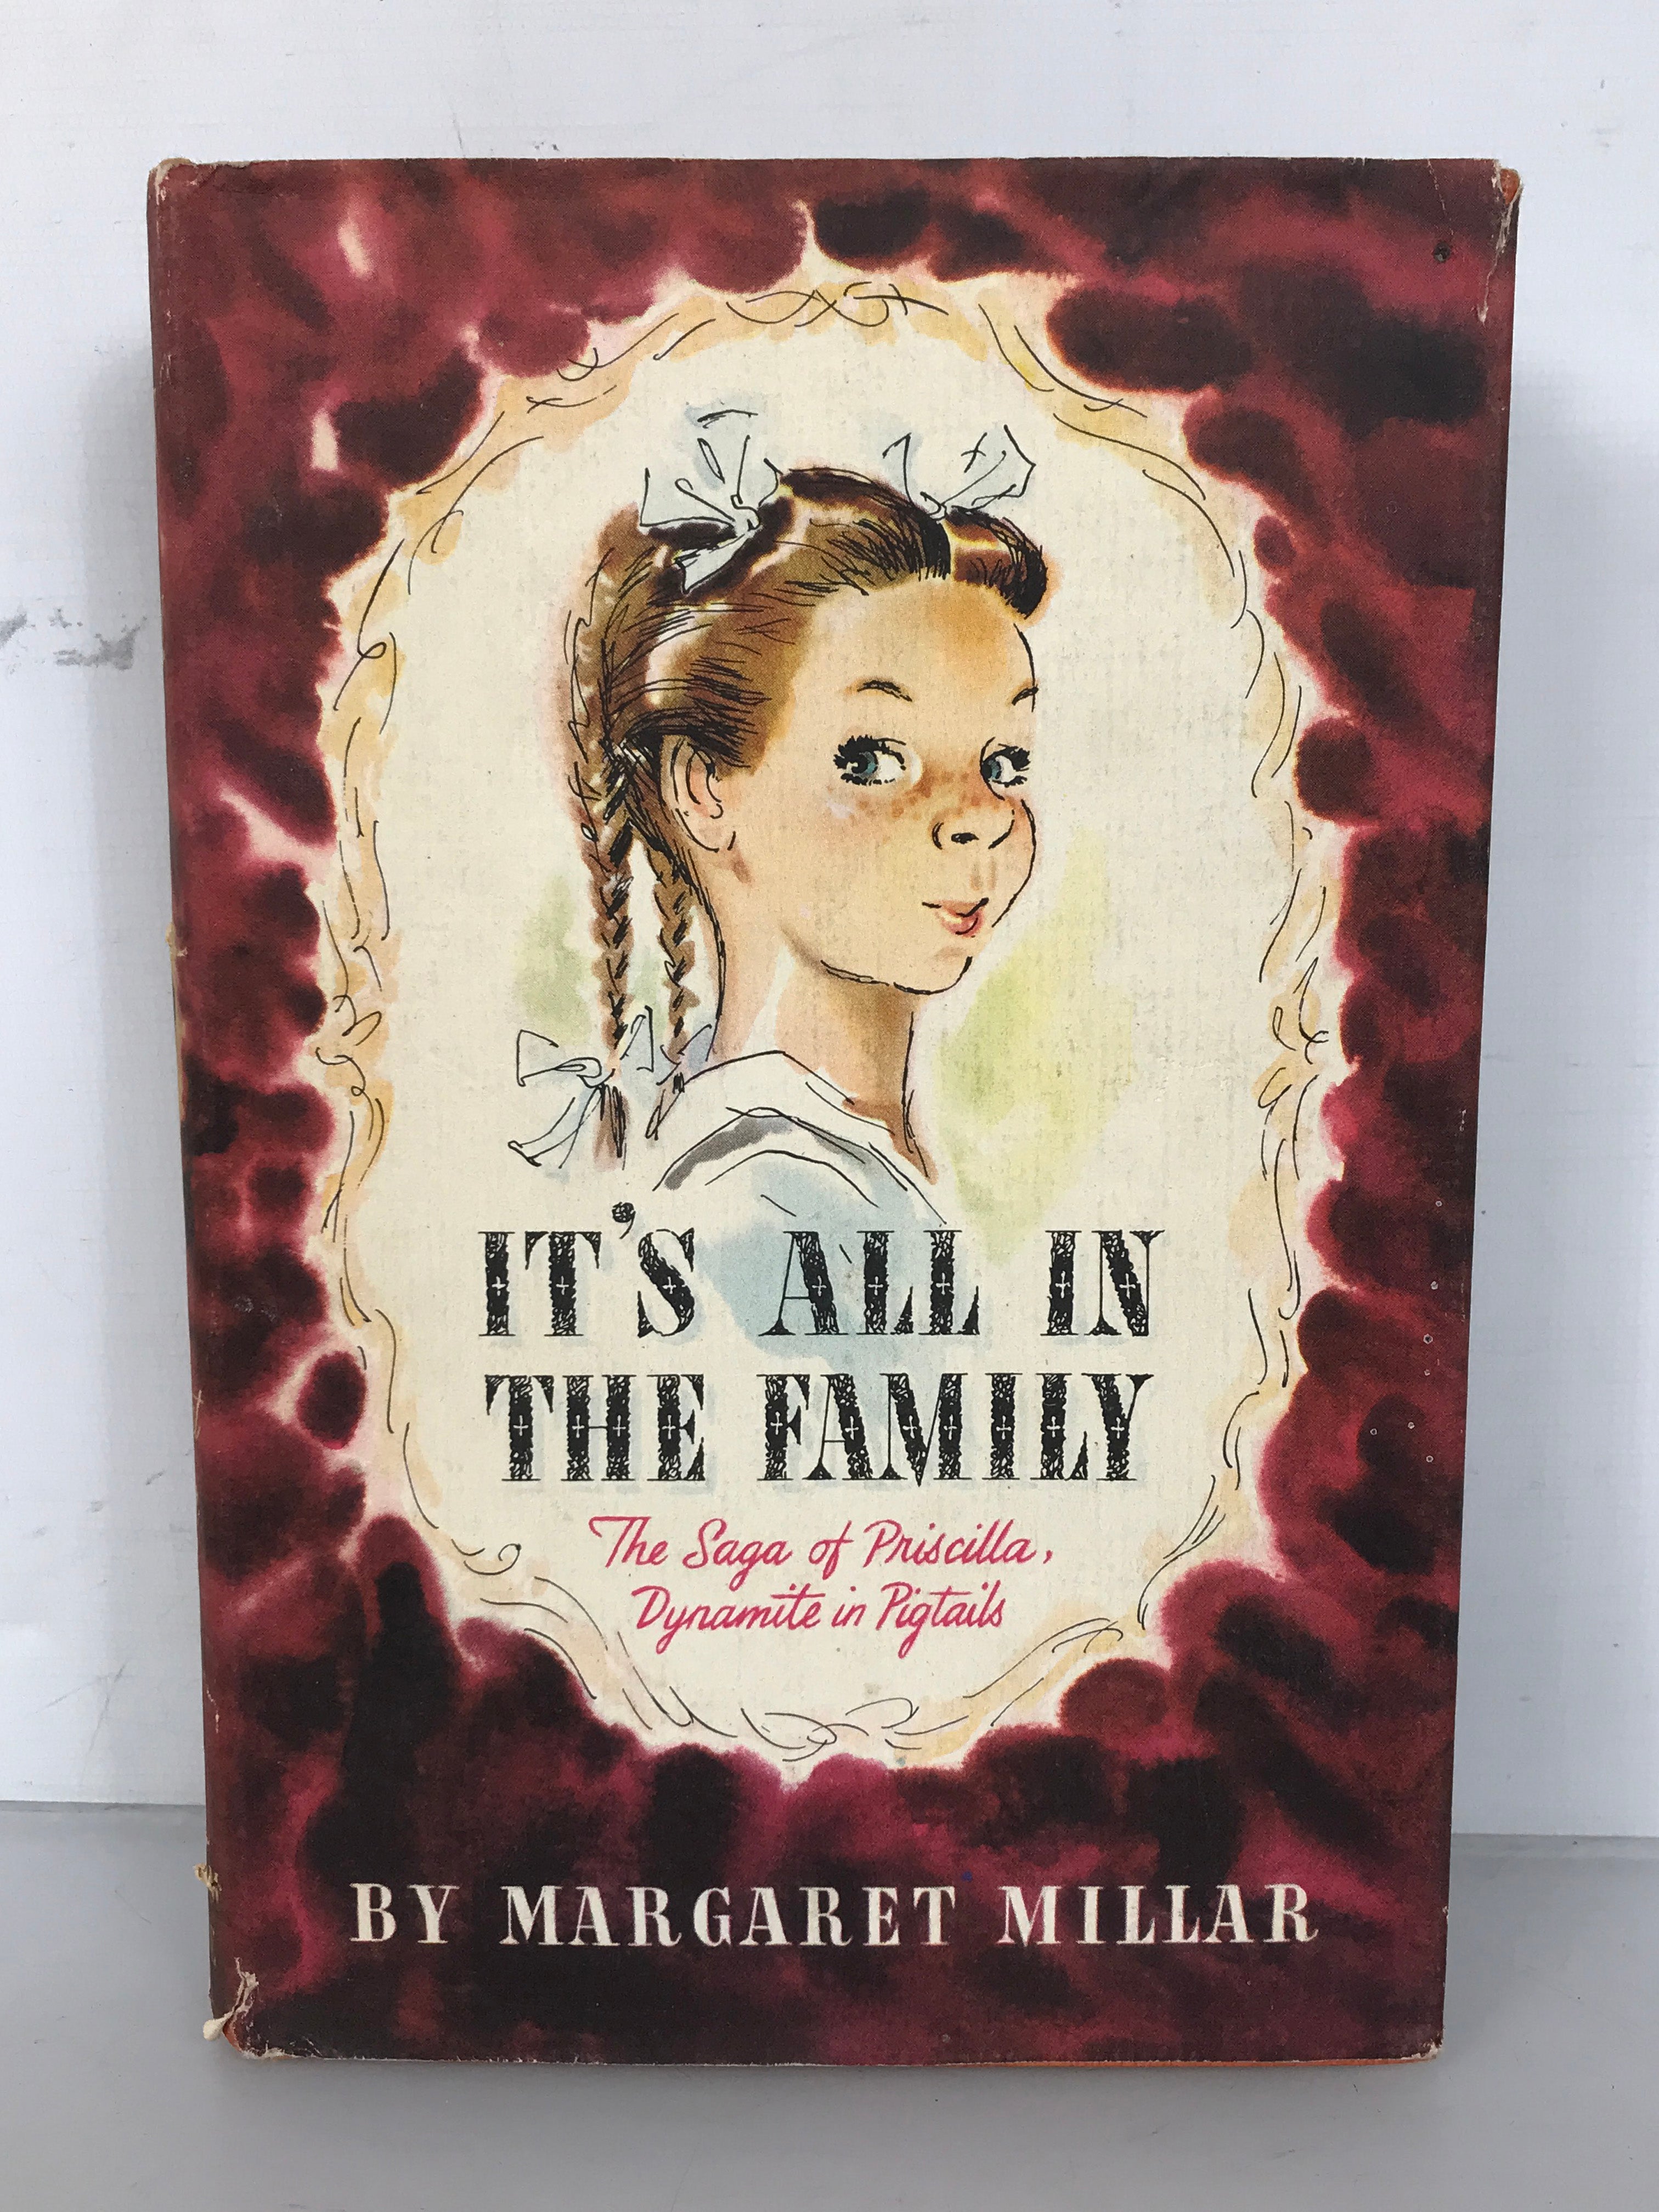 It's All in the Family The Saga of Priscilla, Dynamite in Pigtails by Margaret Millar First Printing 1948 HC DJ